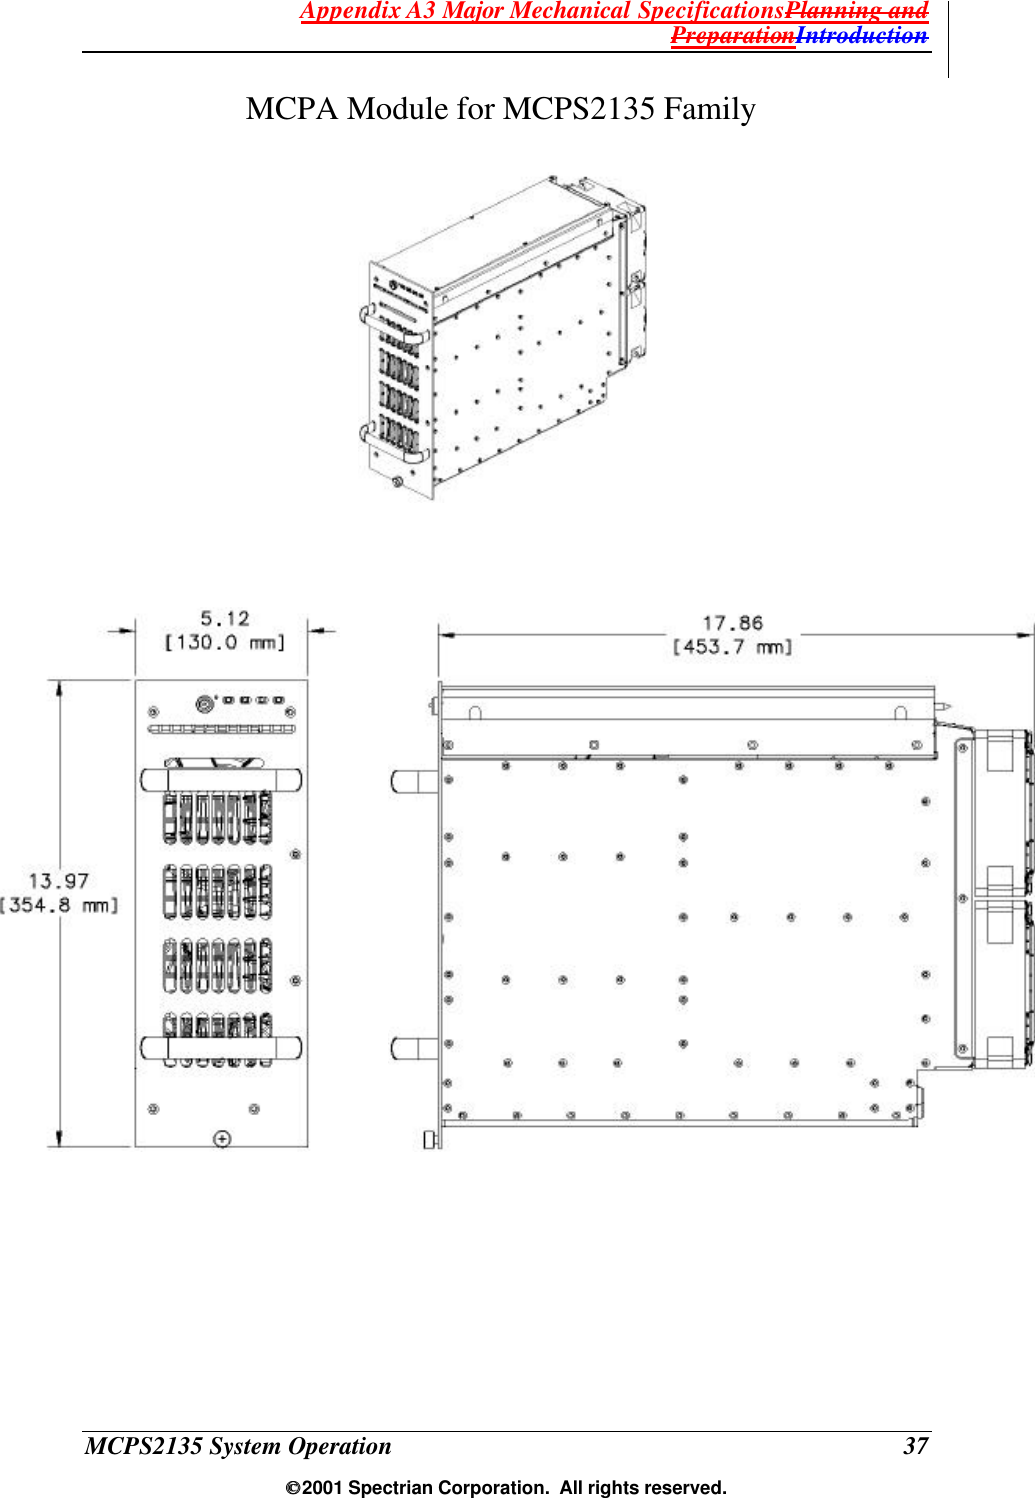 Appendix A3 Major Mechanical SpecificationsPlanning and PreparationIntroduction MCPS2135 System Operation  37  2001 Spectrian Corporation.  All rights reserved.    MCPA Module for MCPS2135 Family 